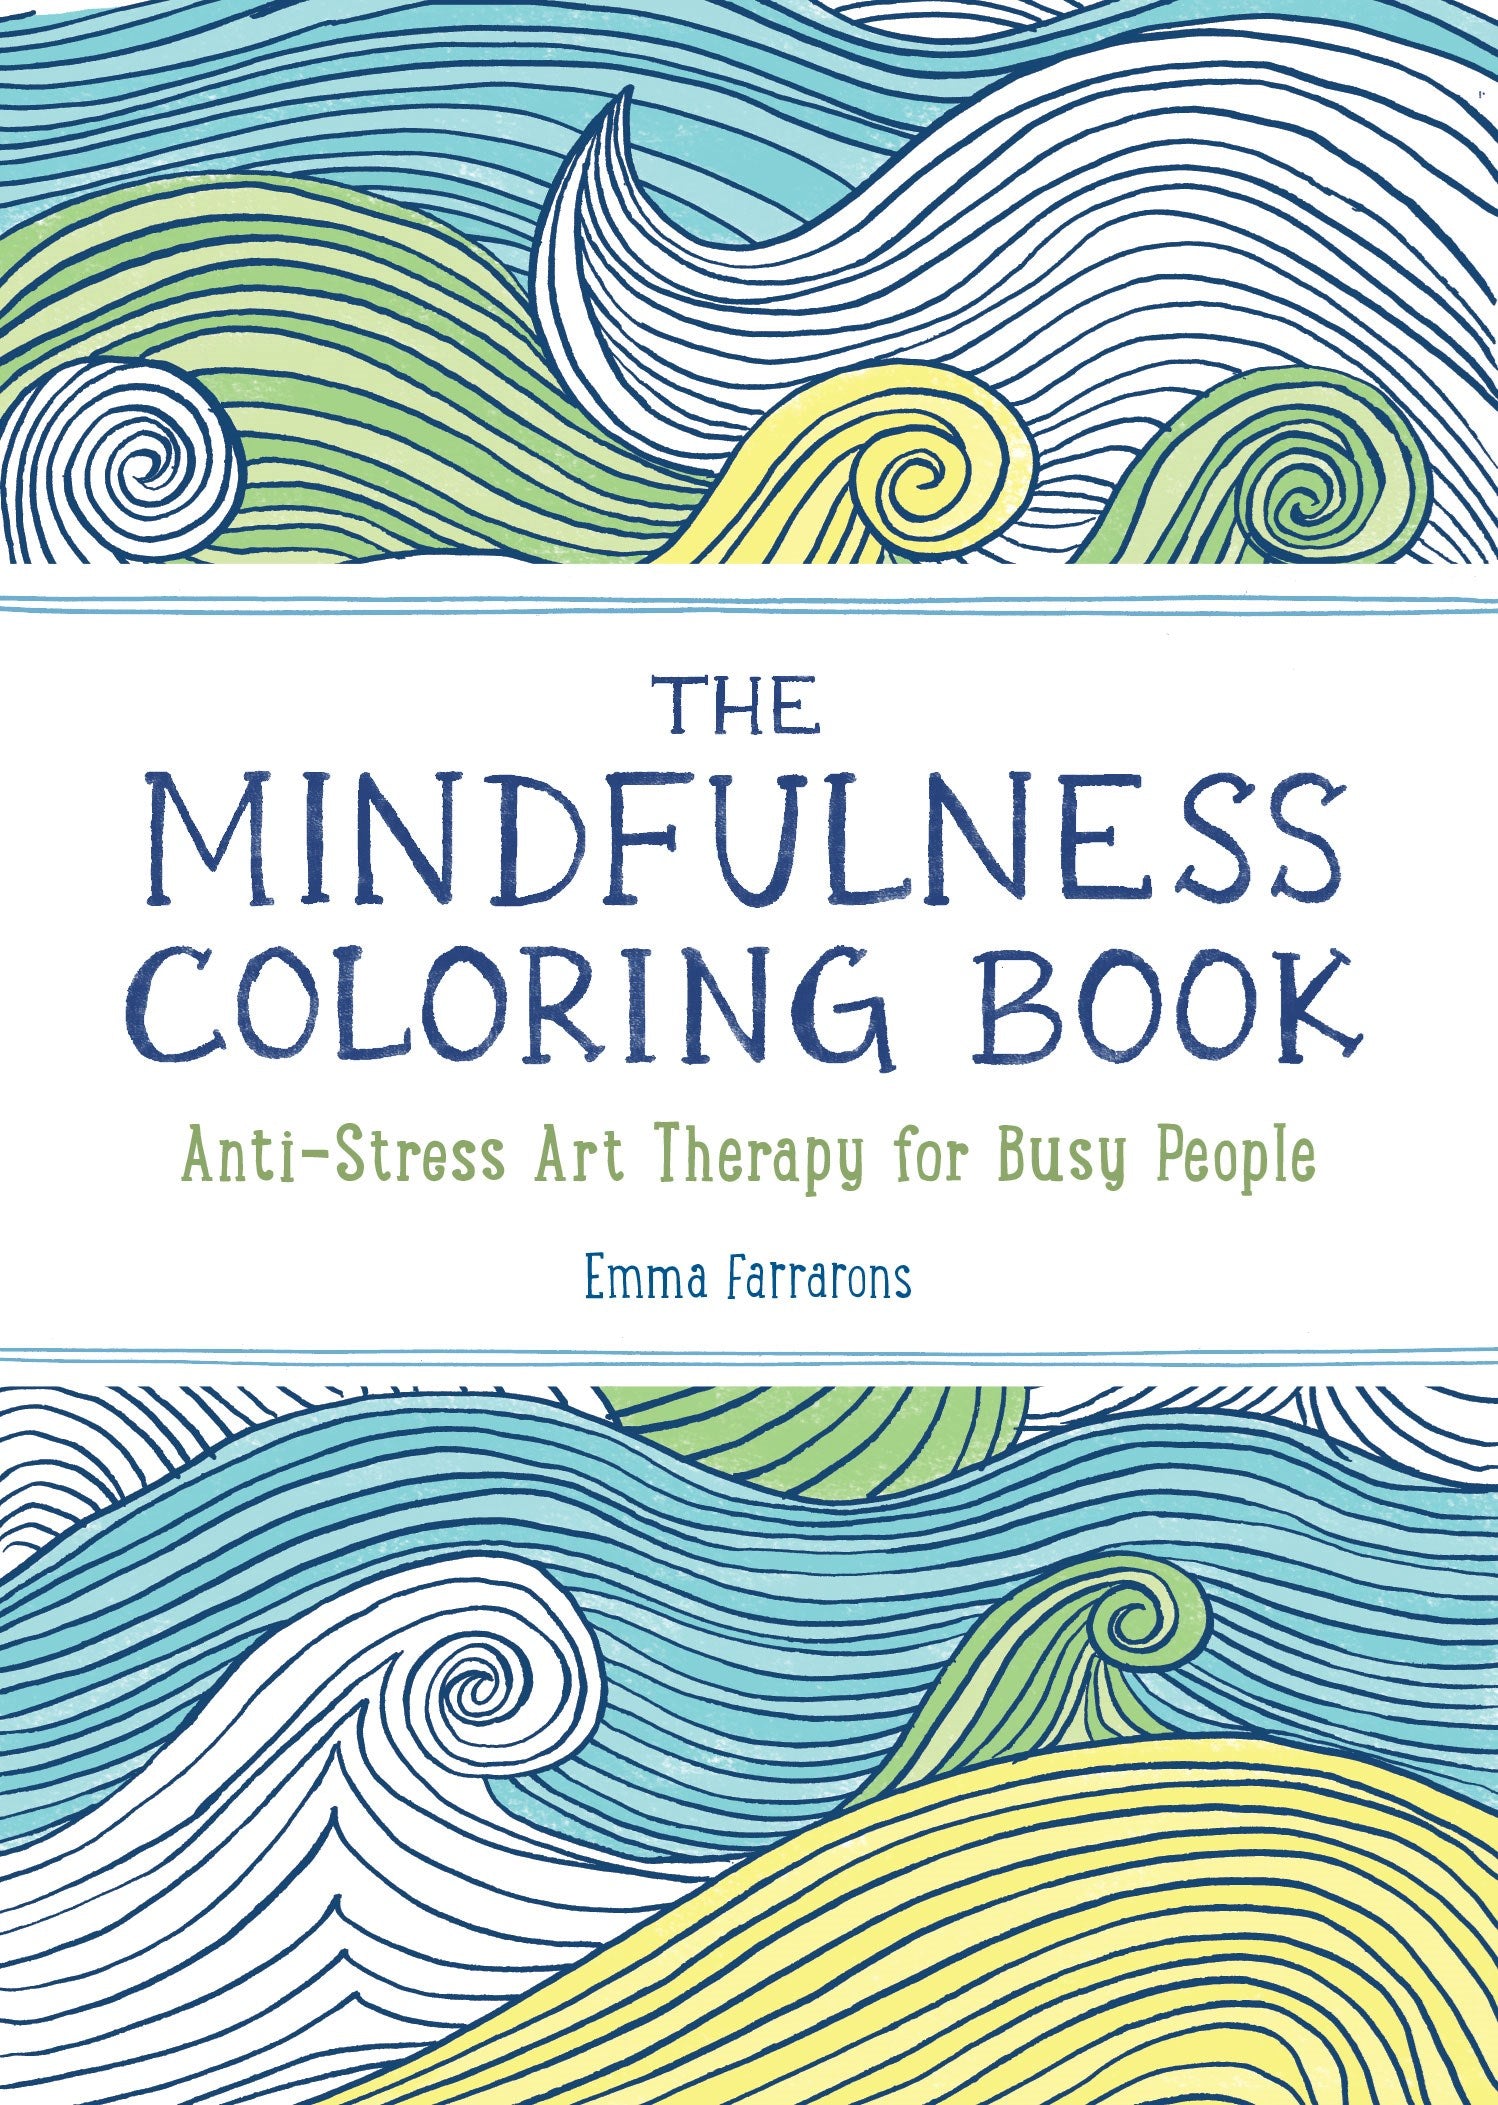 The Anxiety Relief and Mindfulness Coloring Book: The #1 Bestselling Adult Coloring Book : Relaxing, Anti-Stress Nature Patterns and Soothing Designs